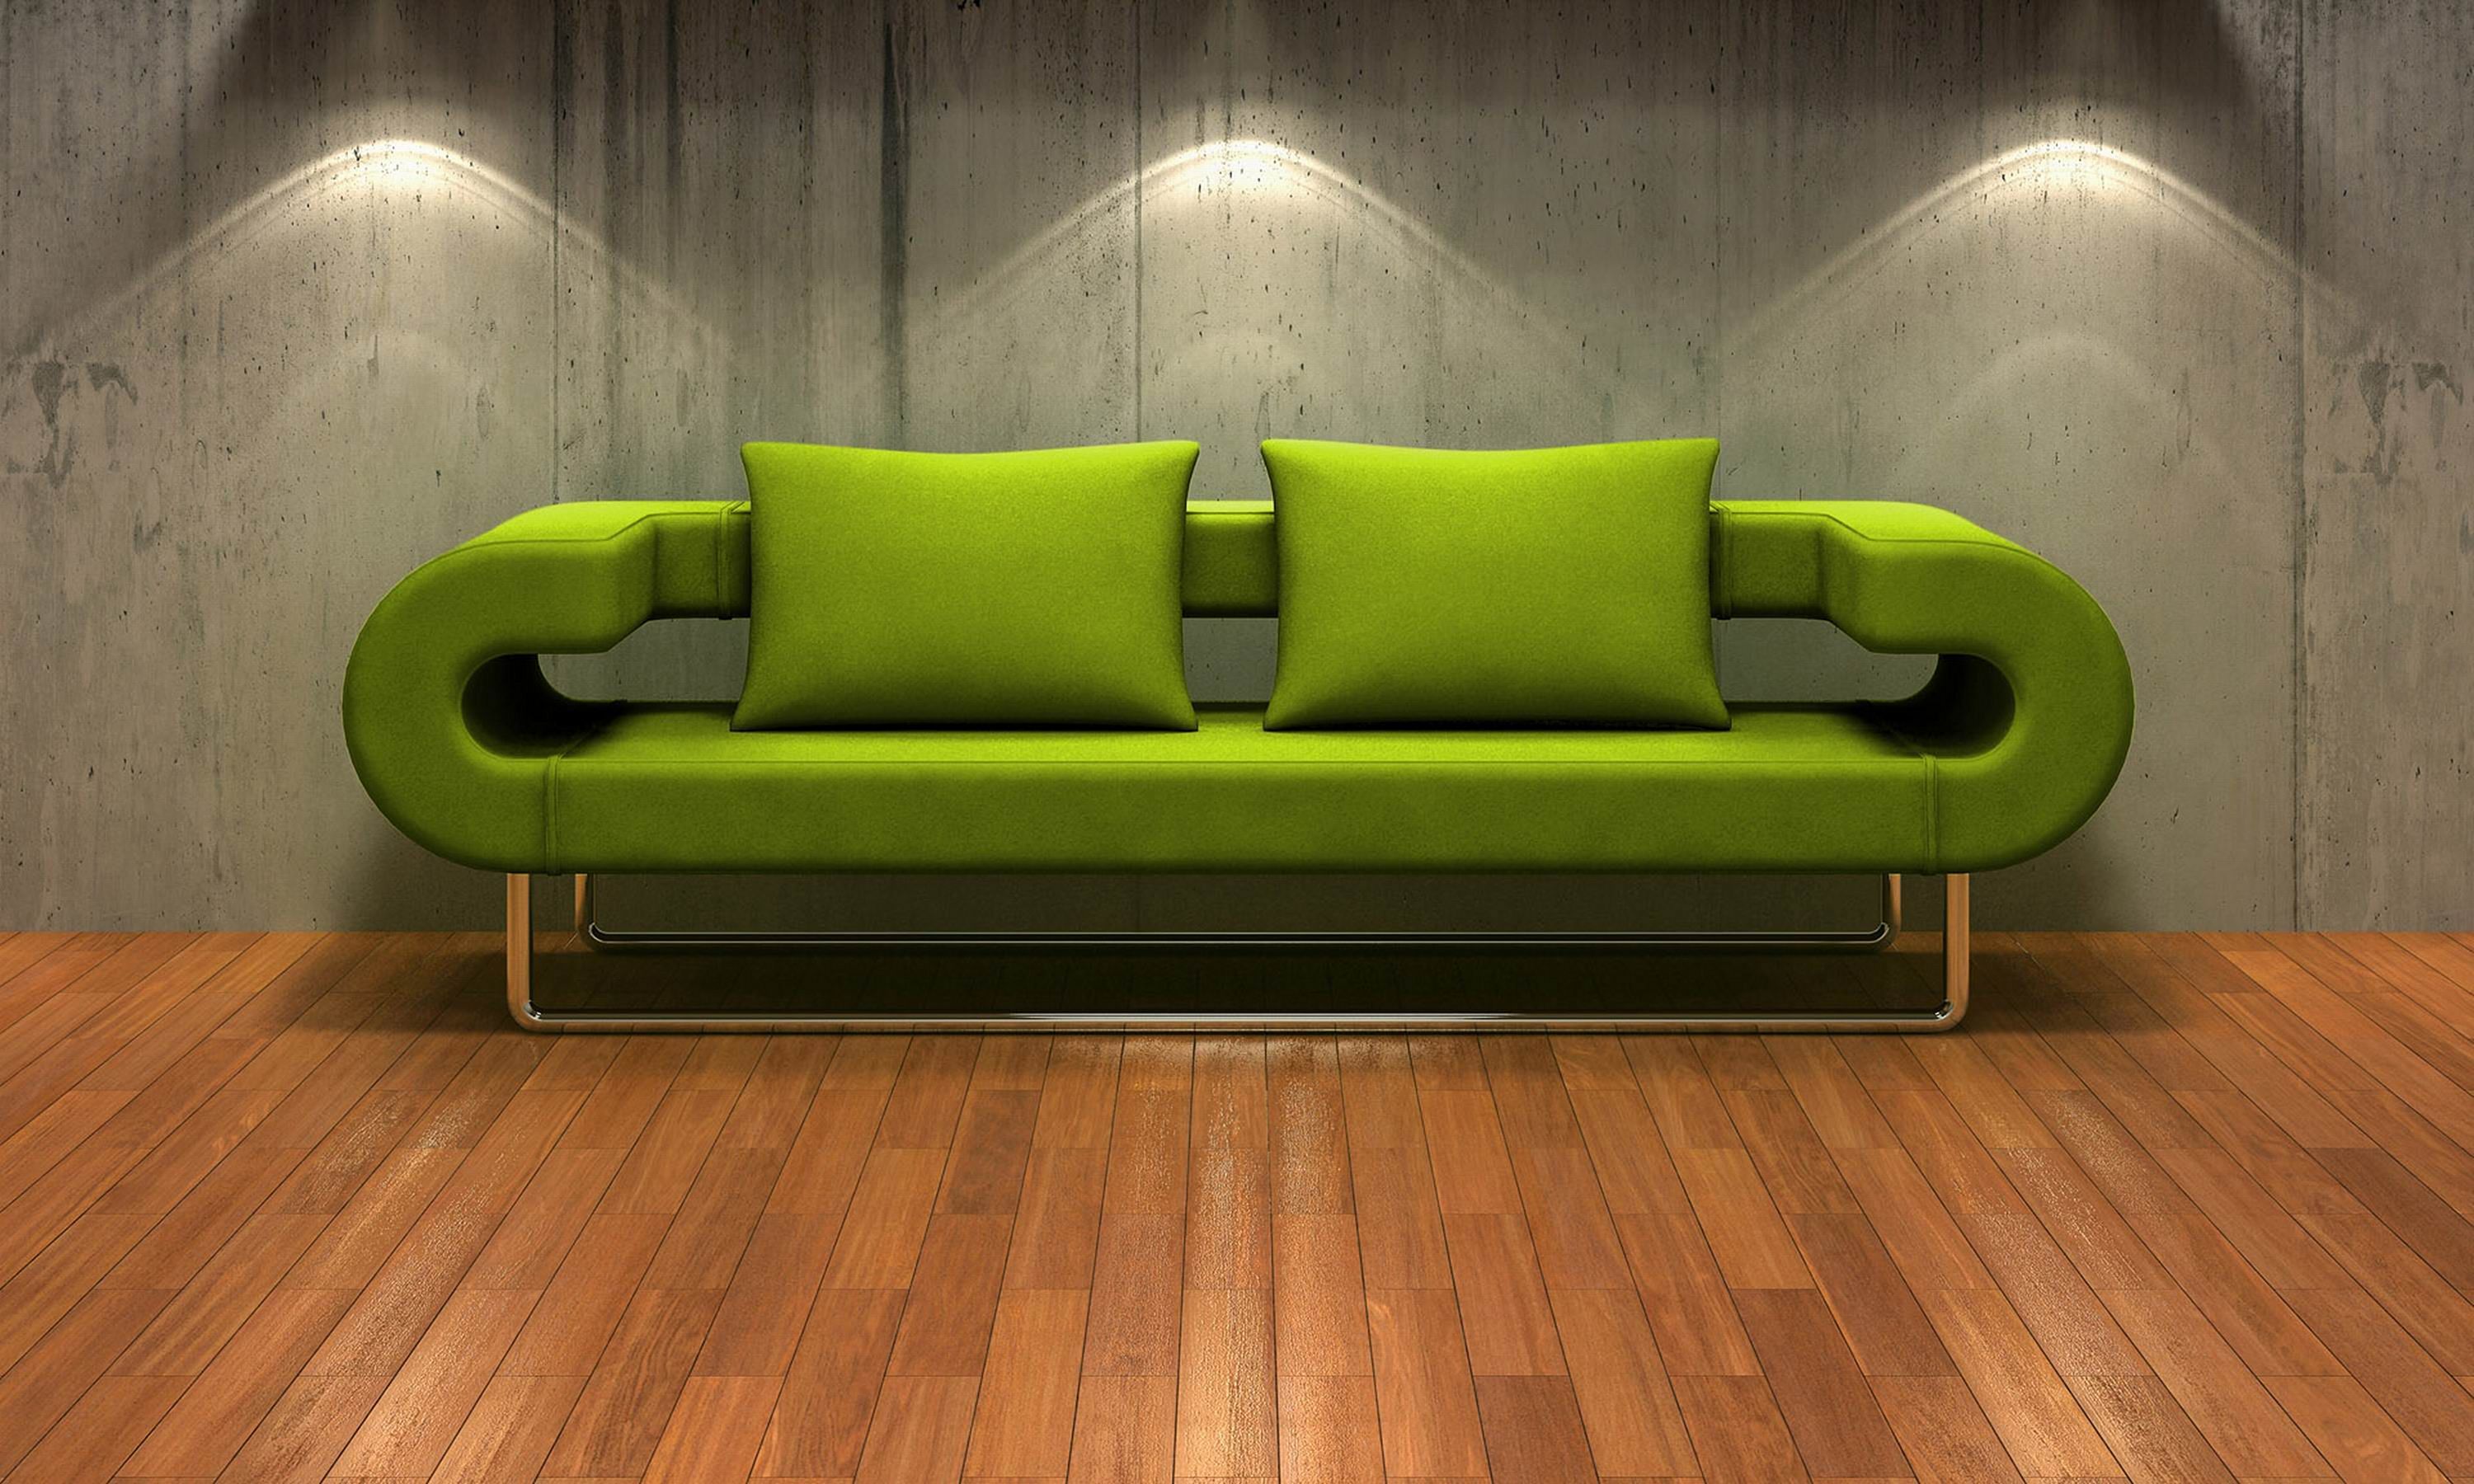 unusual wallpaper for living room,green,furniture,couch,laminate flooring,floor